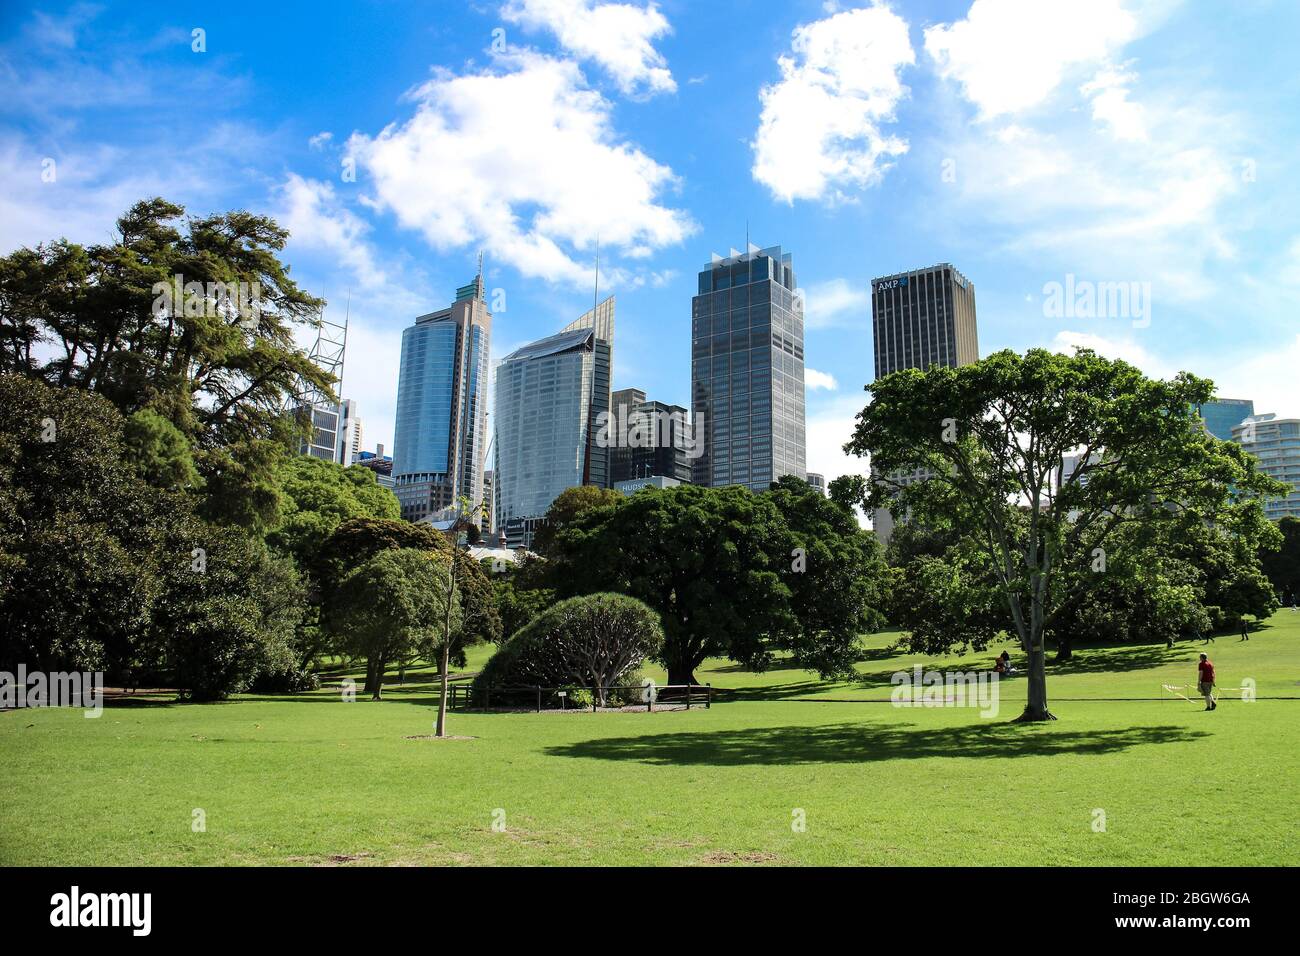 Skyline of Sydney's Central Business District as seen from the Royal Botanic Gardens. Sydney, New South Wales, Australia. Stock Photo